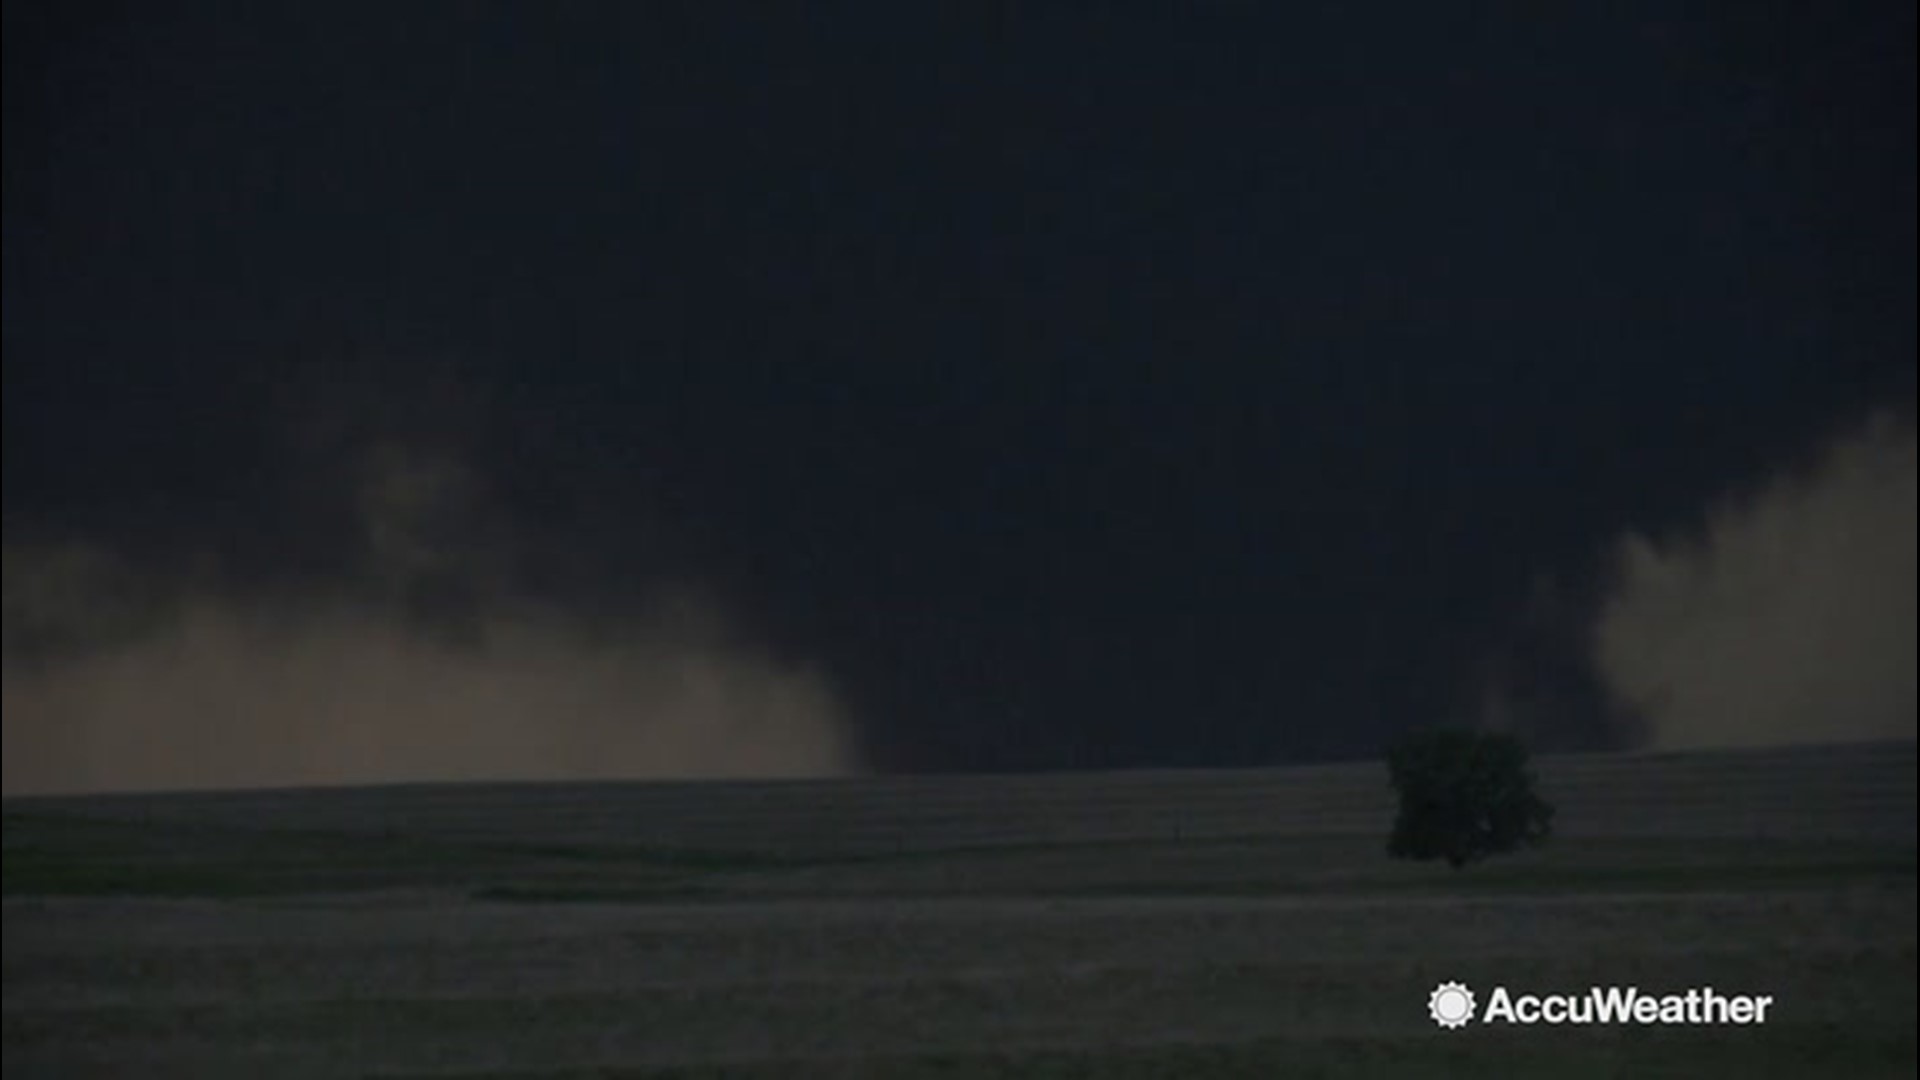 This ominous night-time tornado was spotted swirling near Slapout, Oklahoma just outside the Texas border on May 23 by storm chaser Blake Naftel.